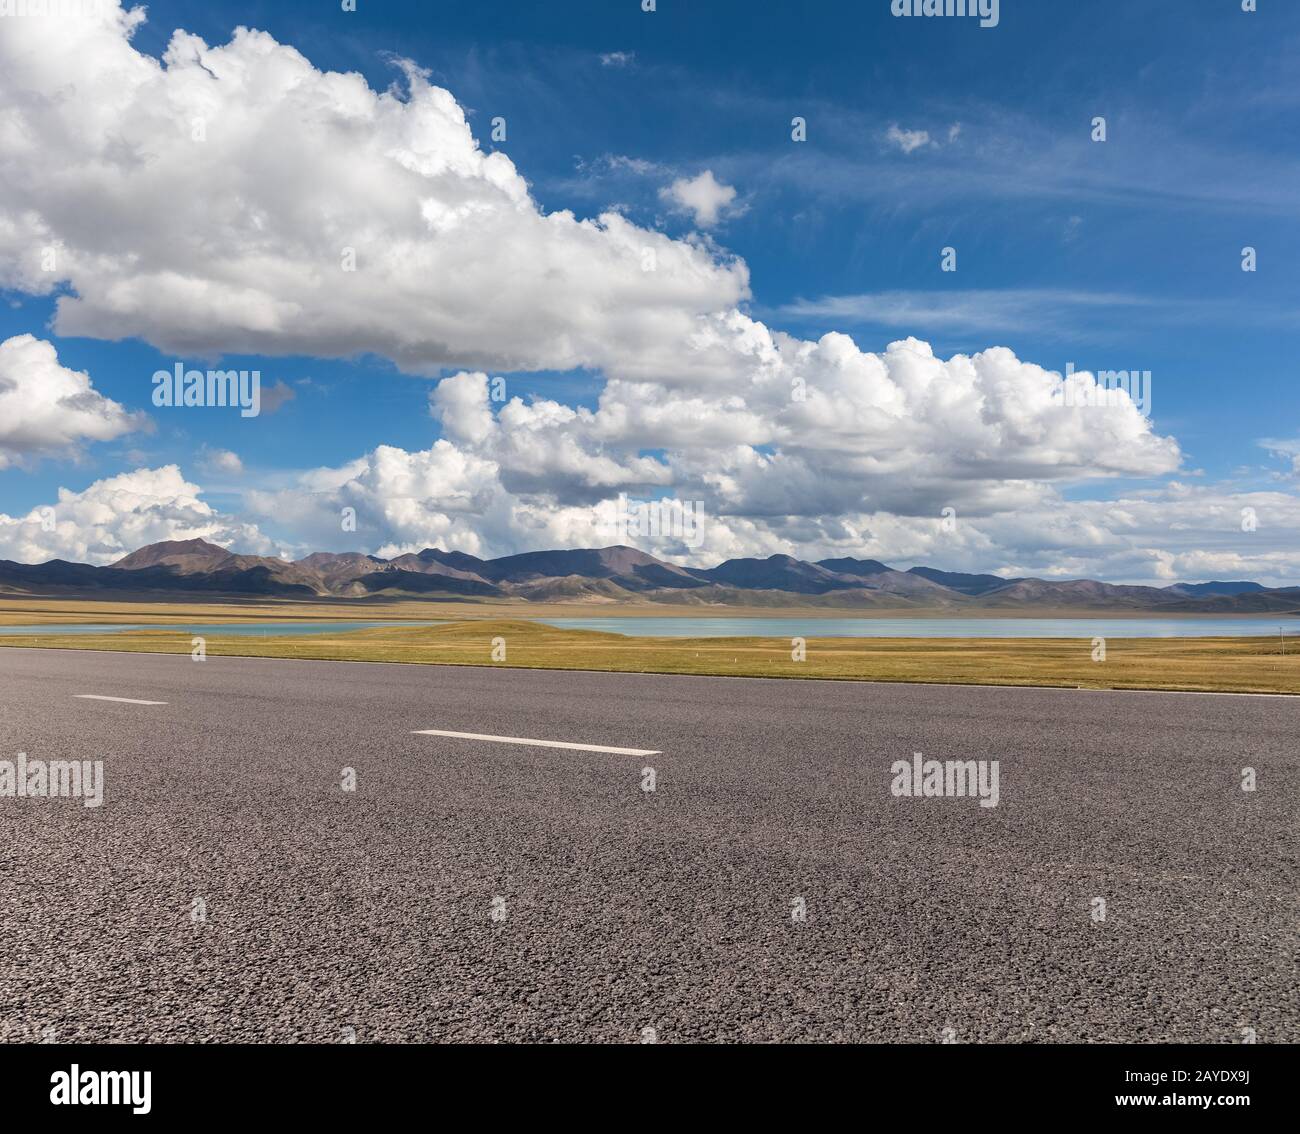 road and plateau scenery Stock Photo